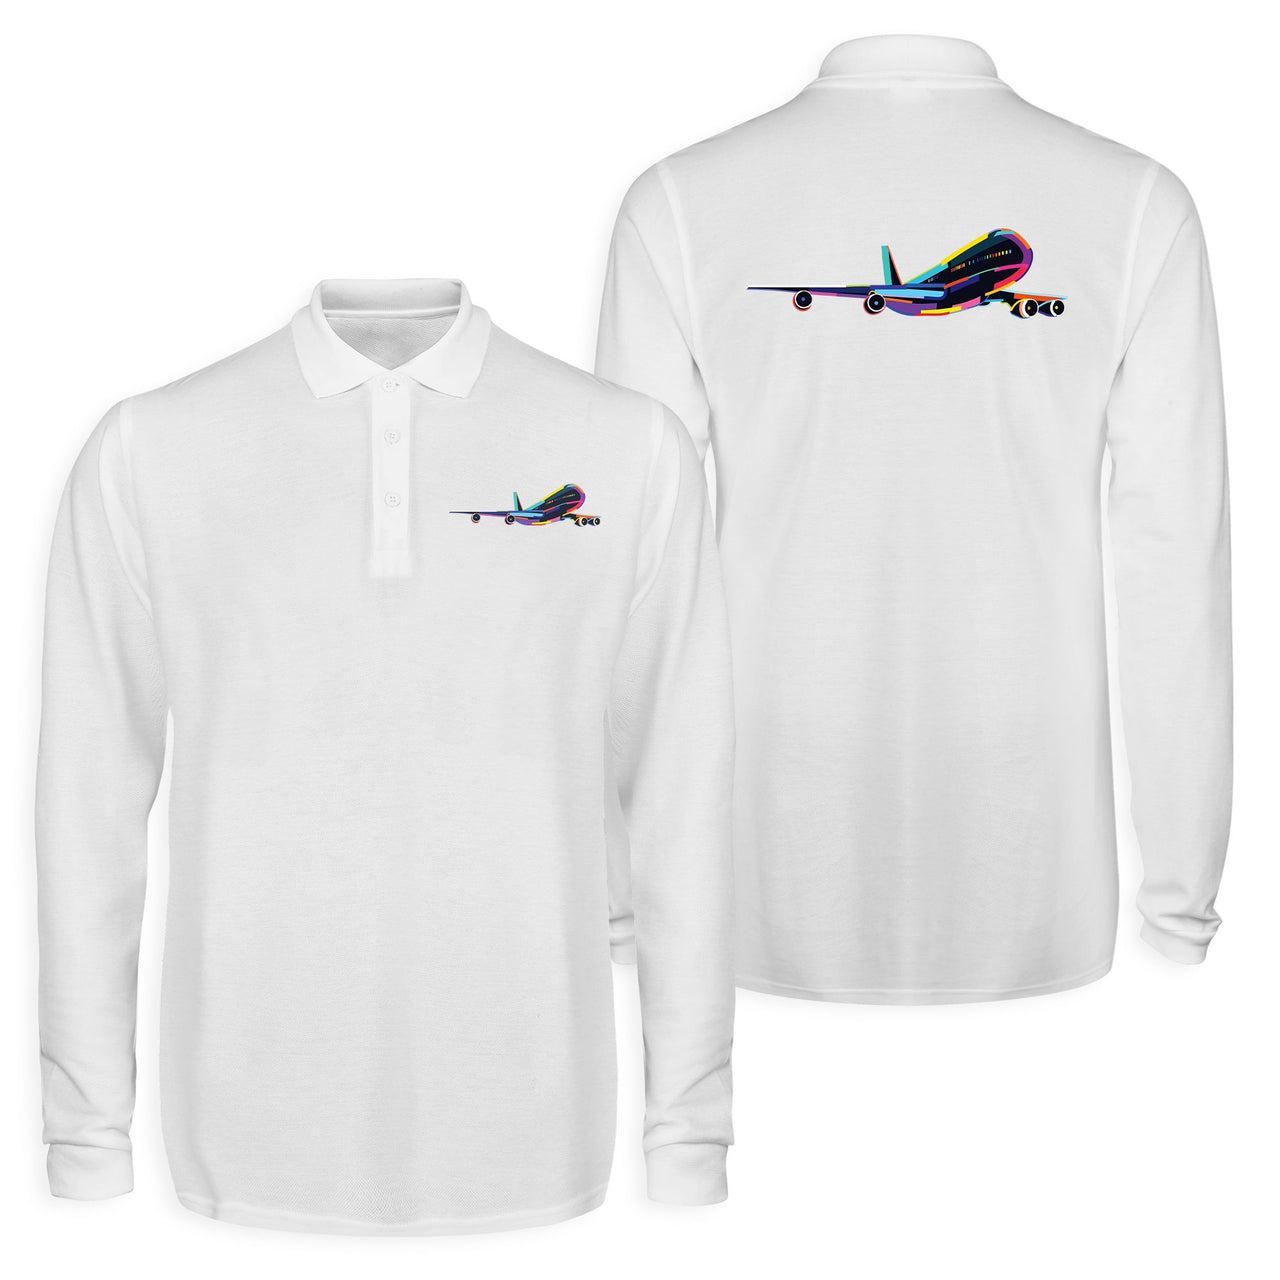 Multicolor Airplane Designed Long Sleeve Polo T-Shirts (Double-Side)